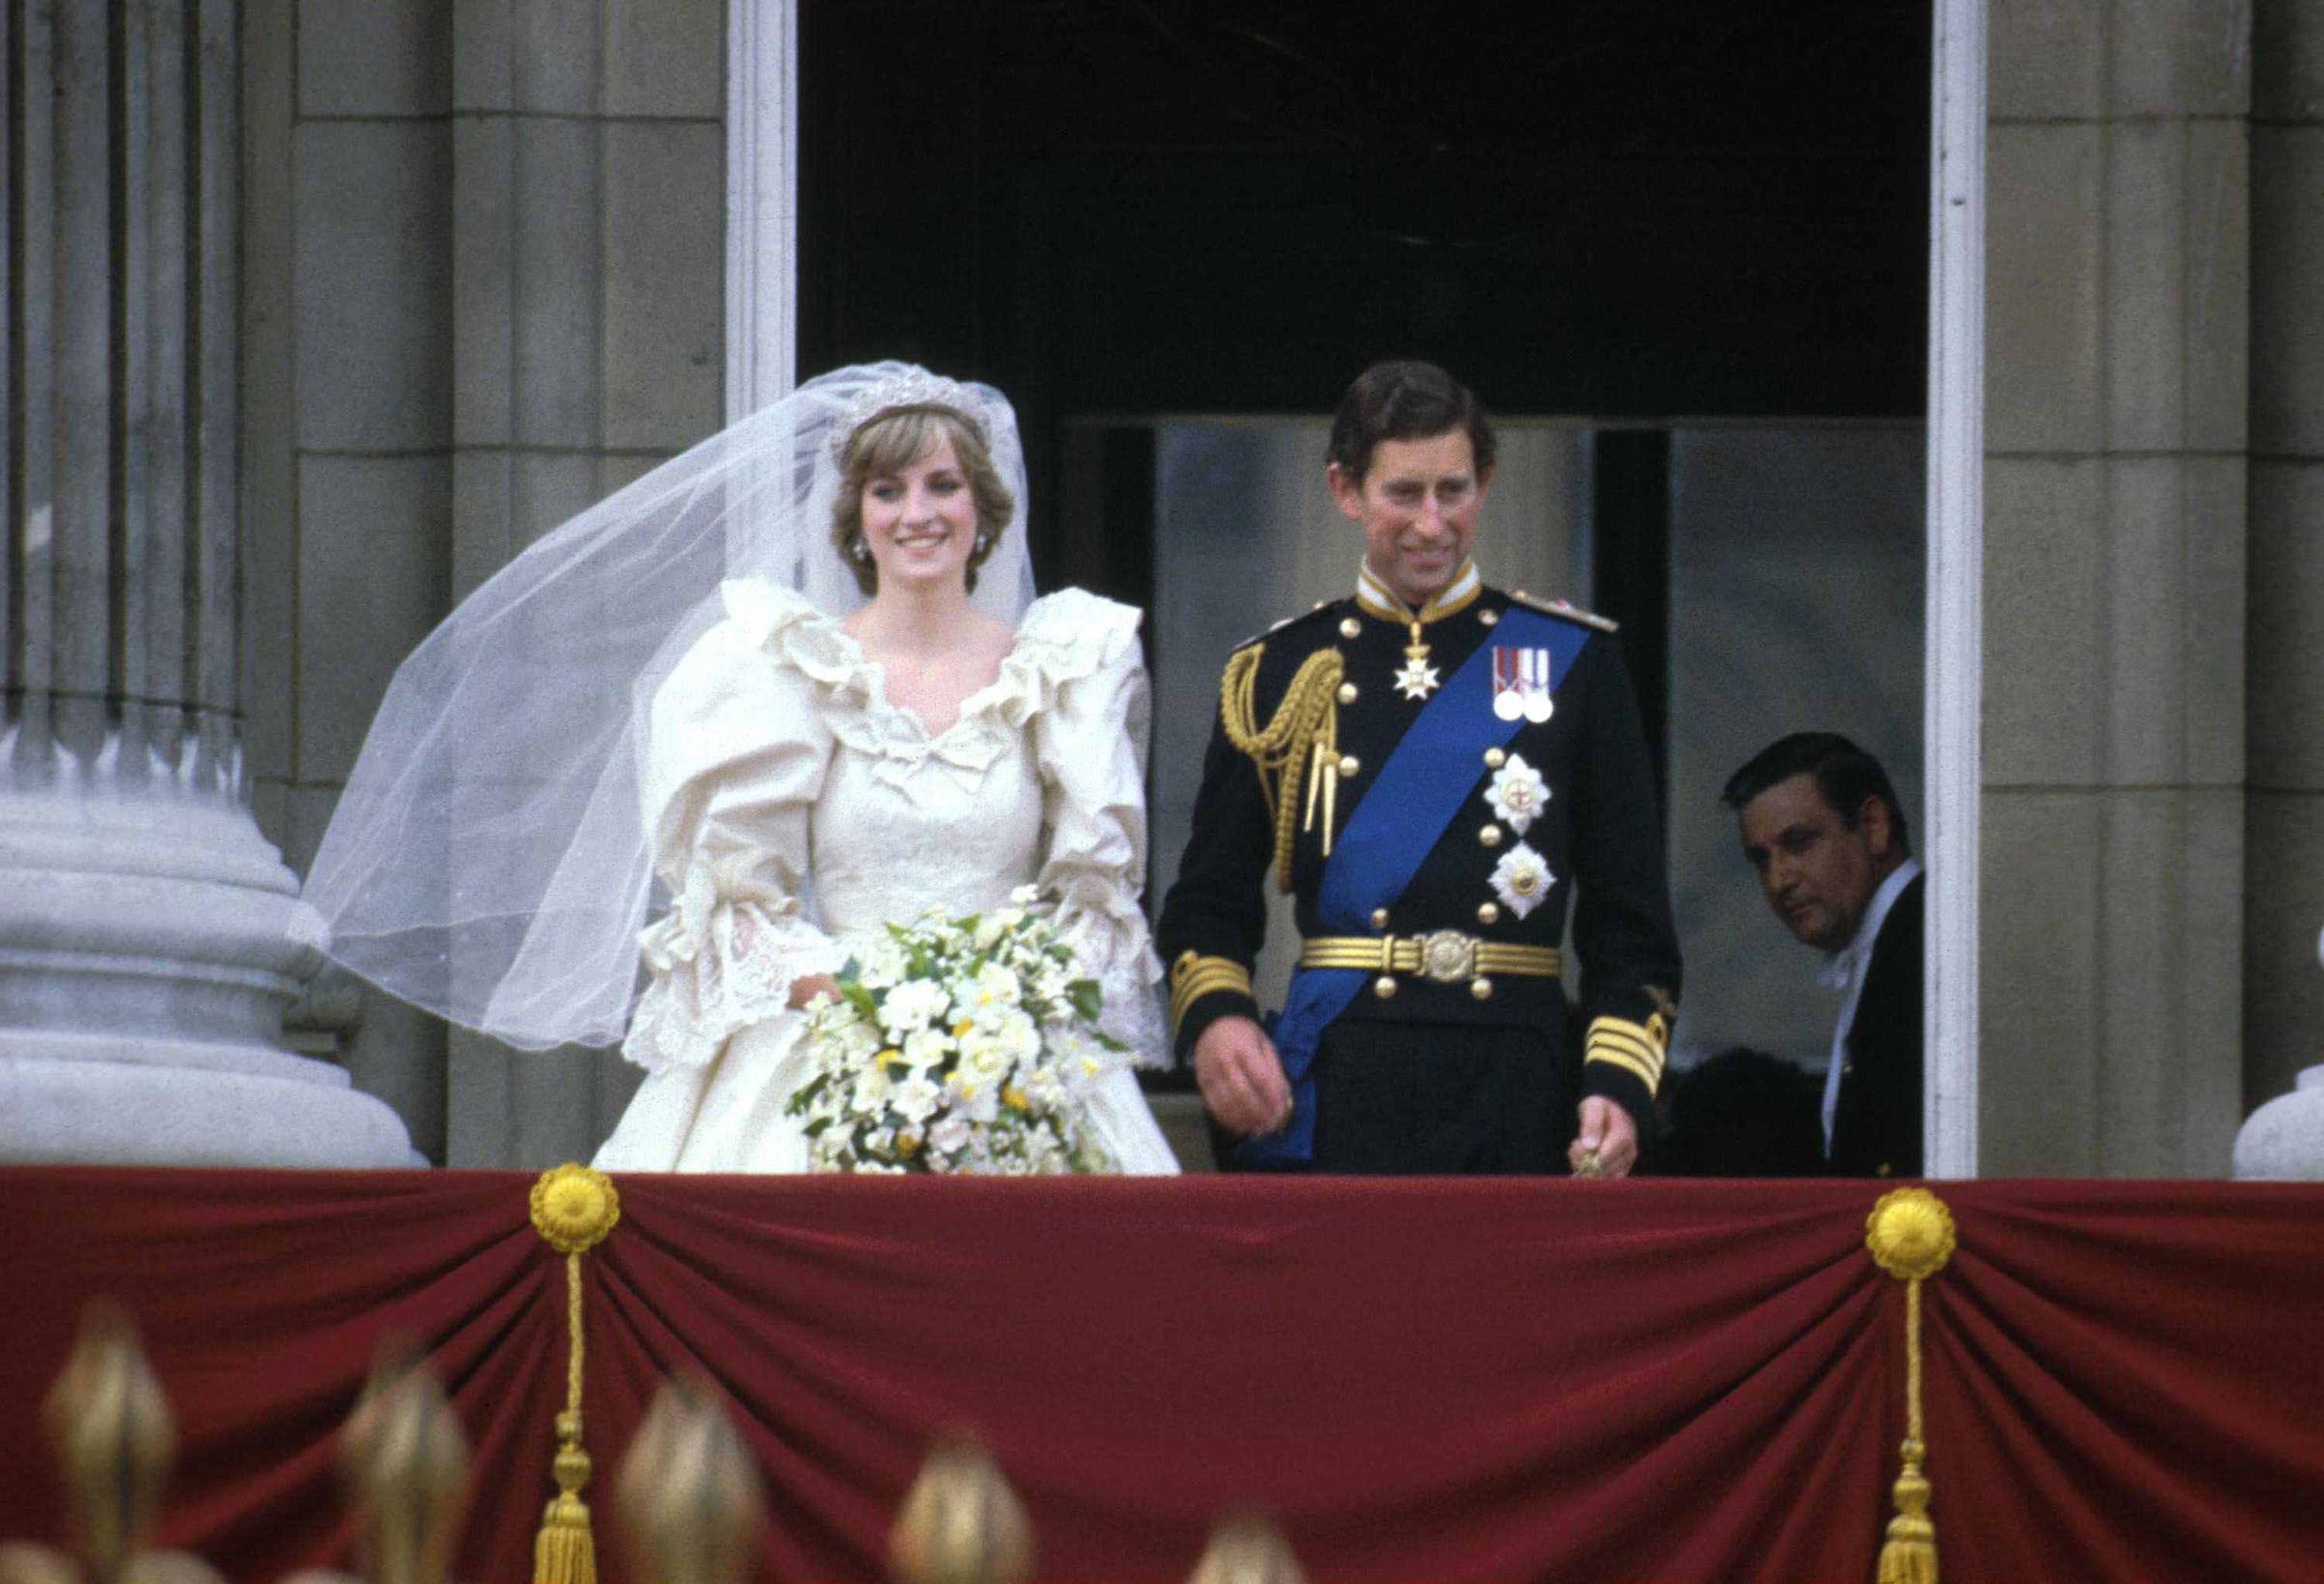 Prince Charles and Princess Diana on the balcony of Buckingham Palace after their wedding ceremony at St. Paul's Cathedral, London, England on July 29, 1981 | Photo: Express Newspapers/Getty Images